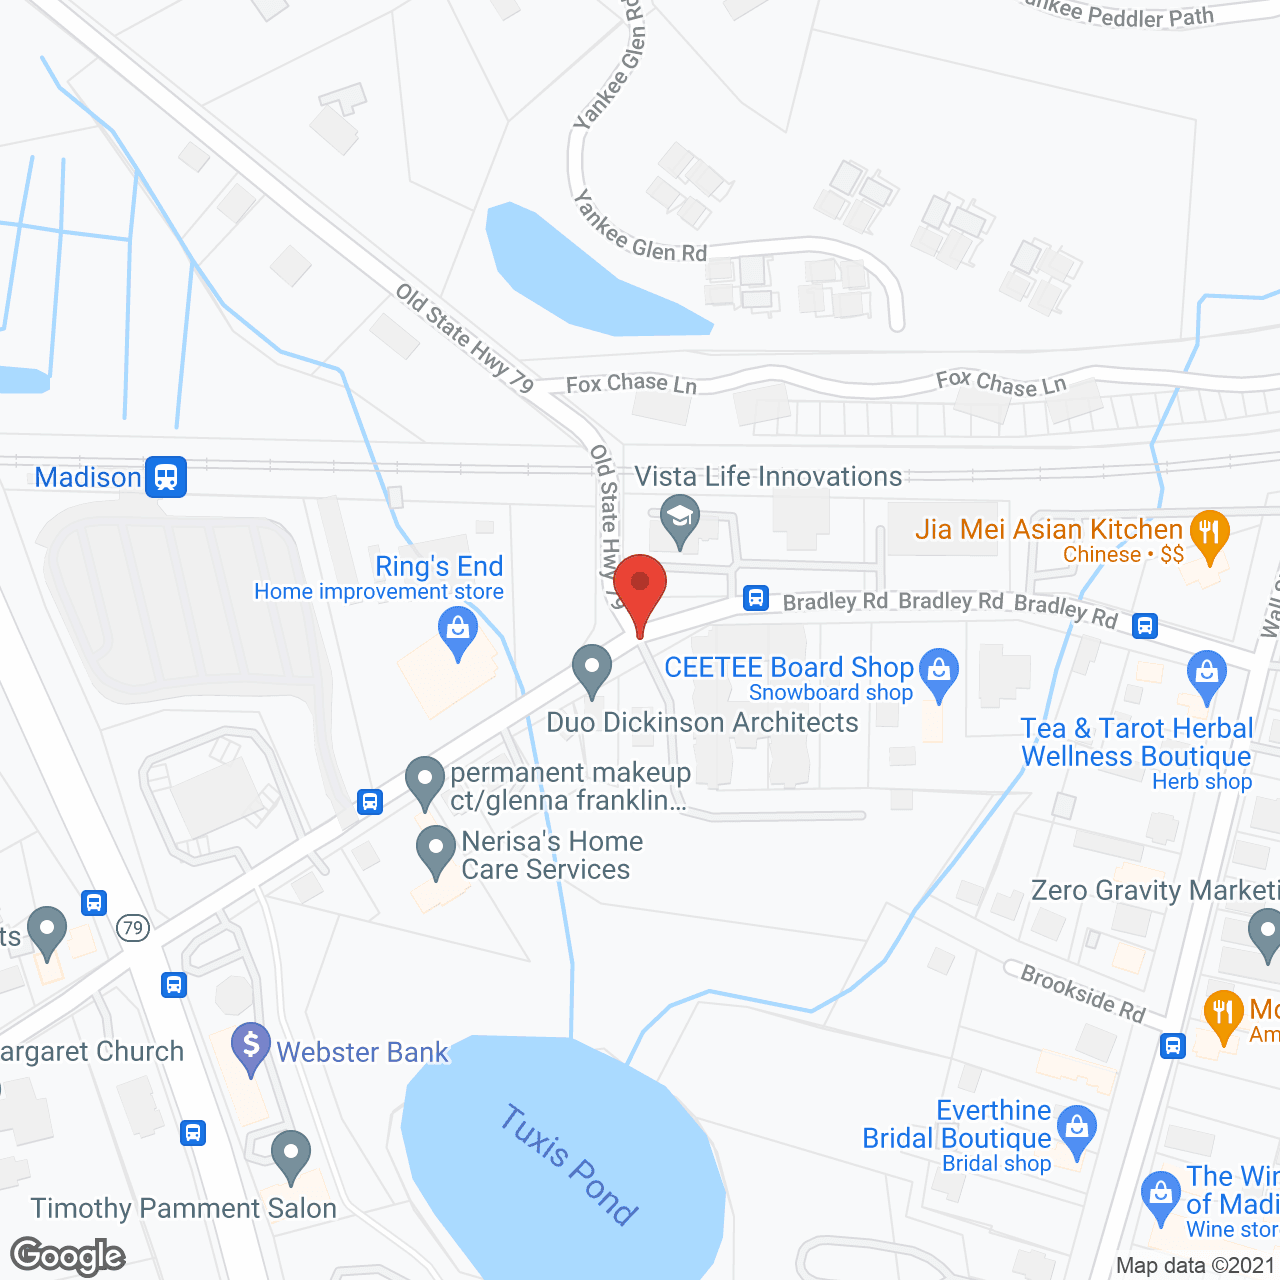 HarborChase of Madison in google map